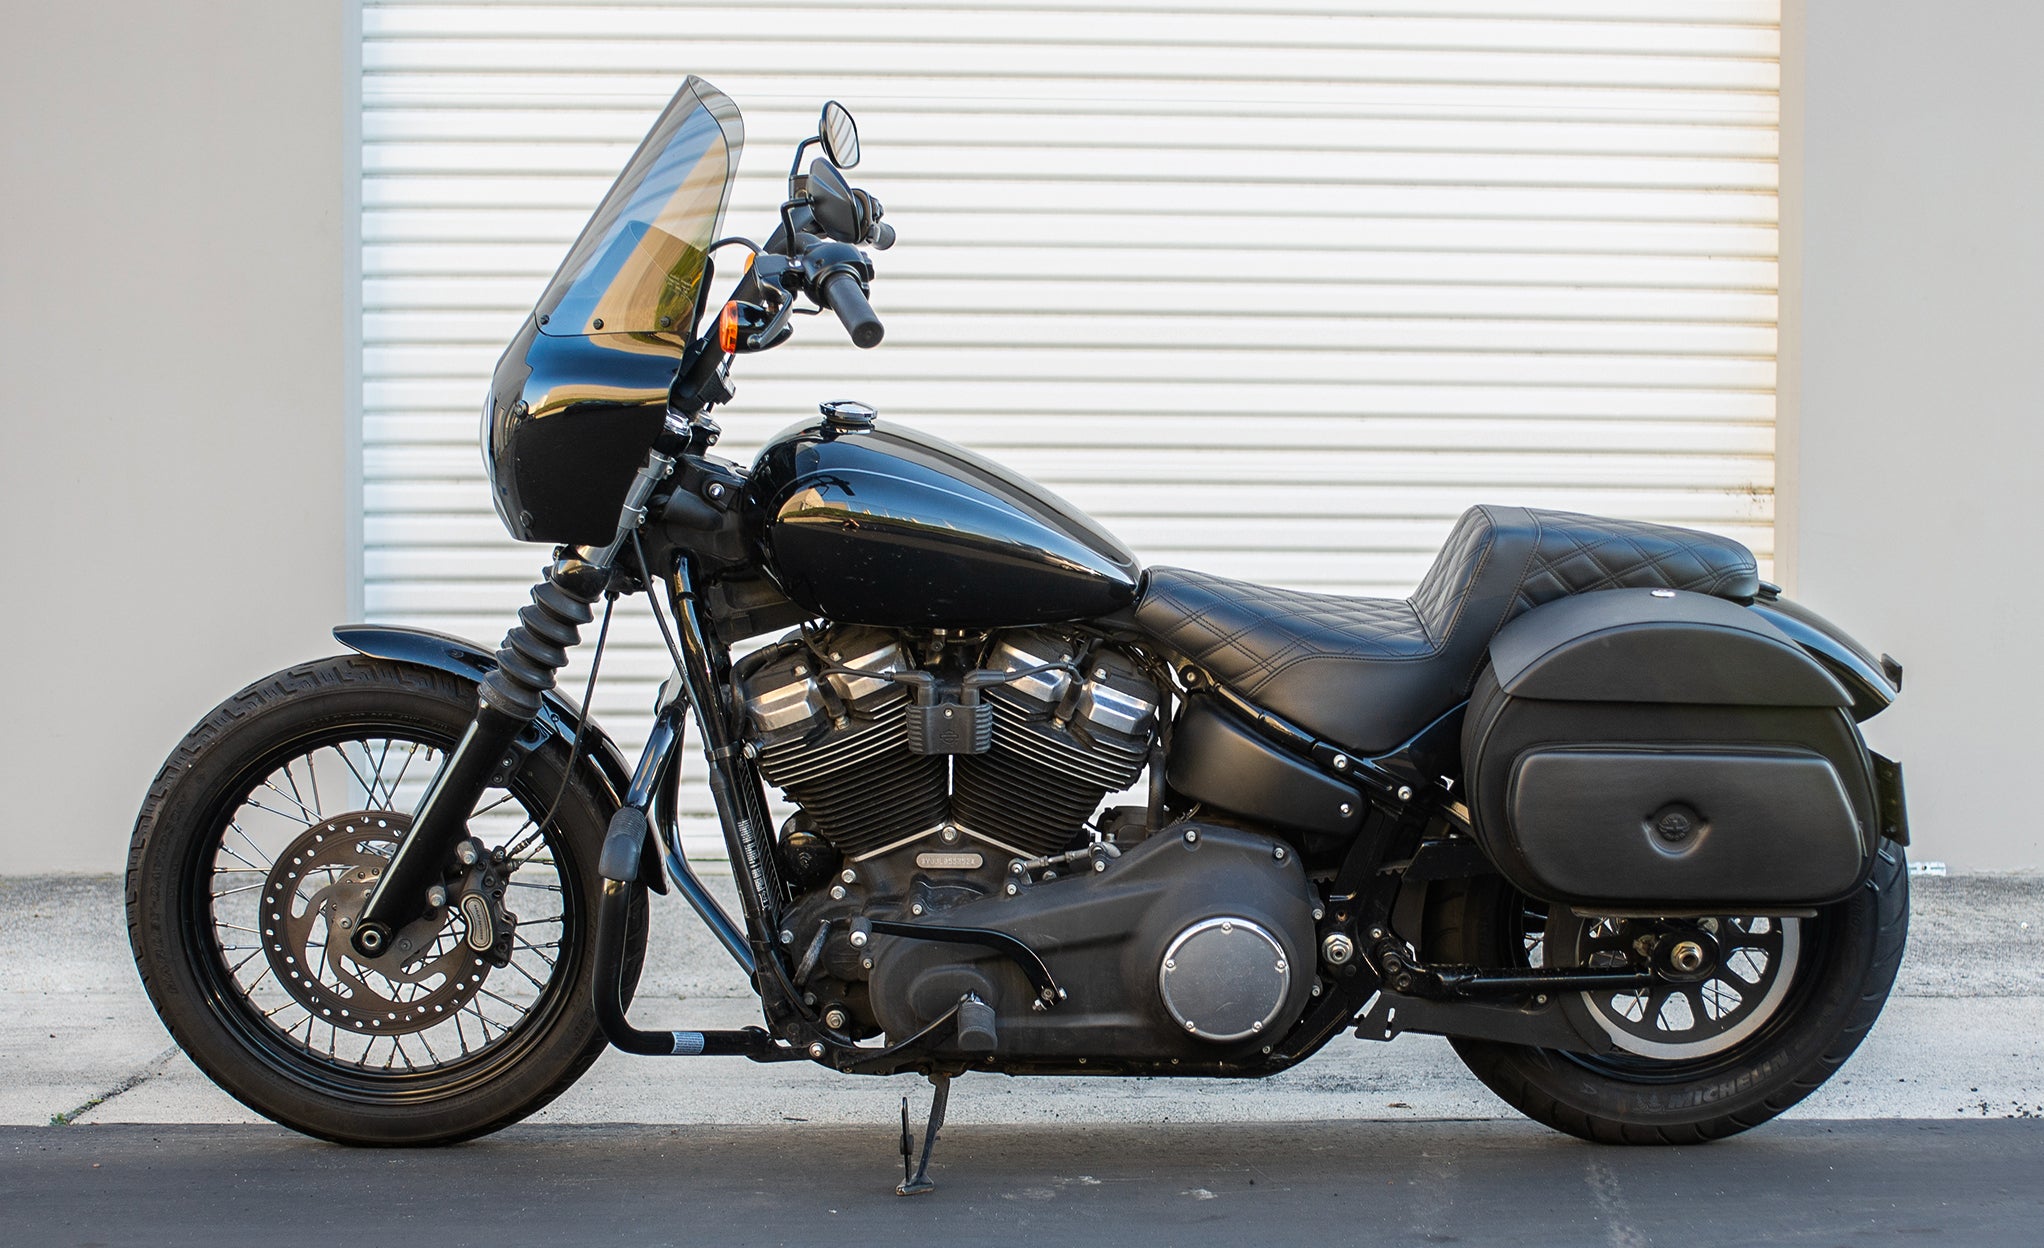 30L - Stealth Large Quick Mount Saddlebags for Harley Davidson Softail Street Bob FXBB @expand